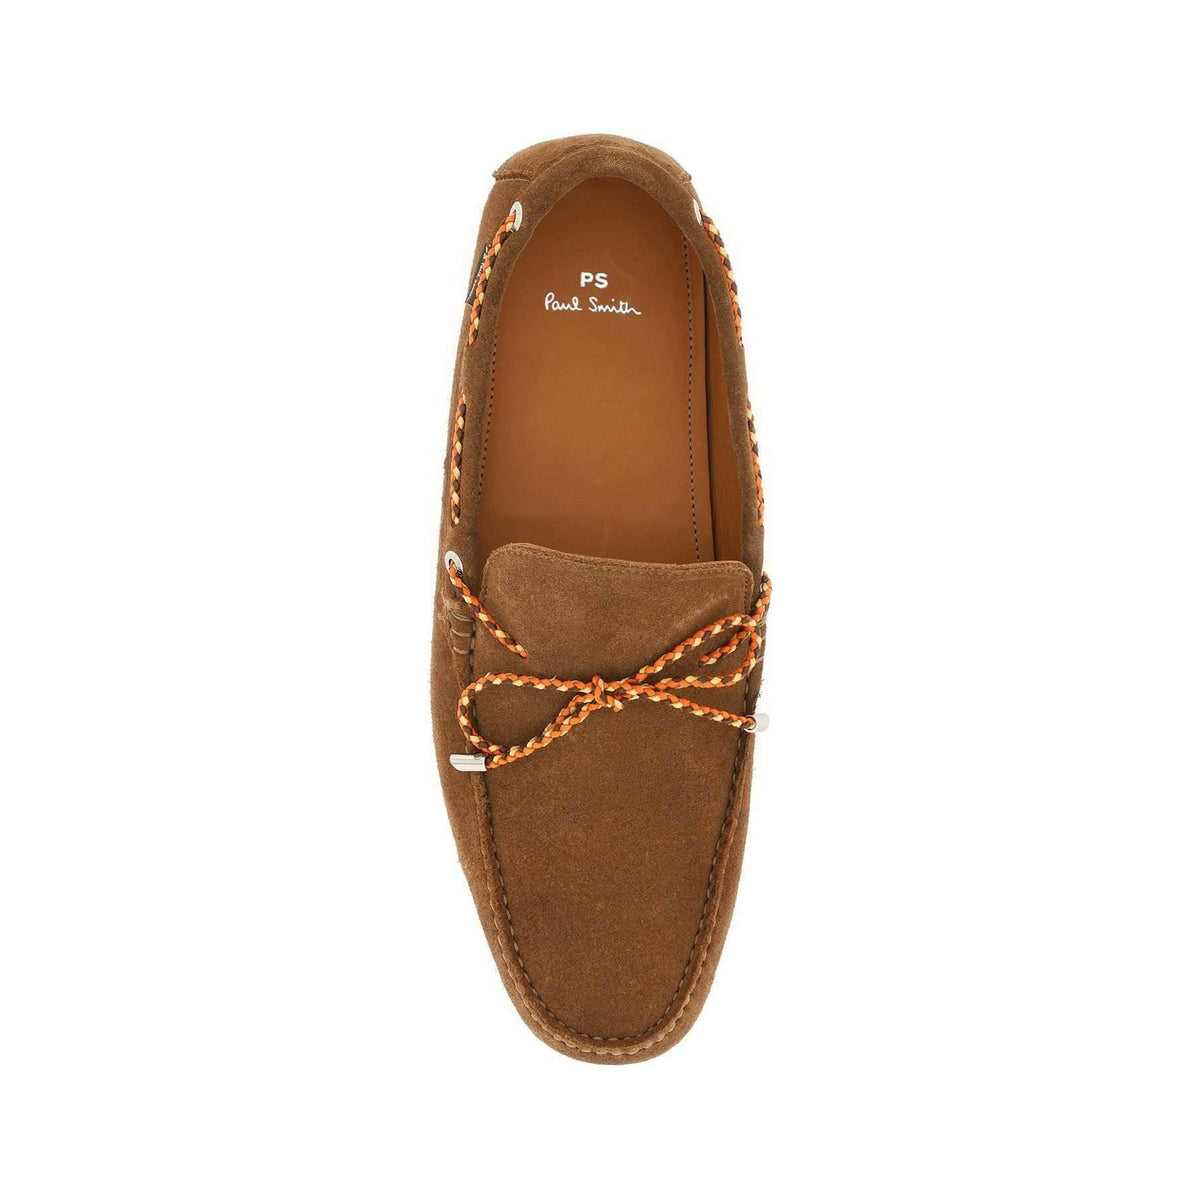 PS PAUL SMITH - Tan Suede Springfield Driving Loafers - JOHN JULIA